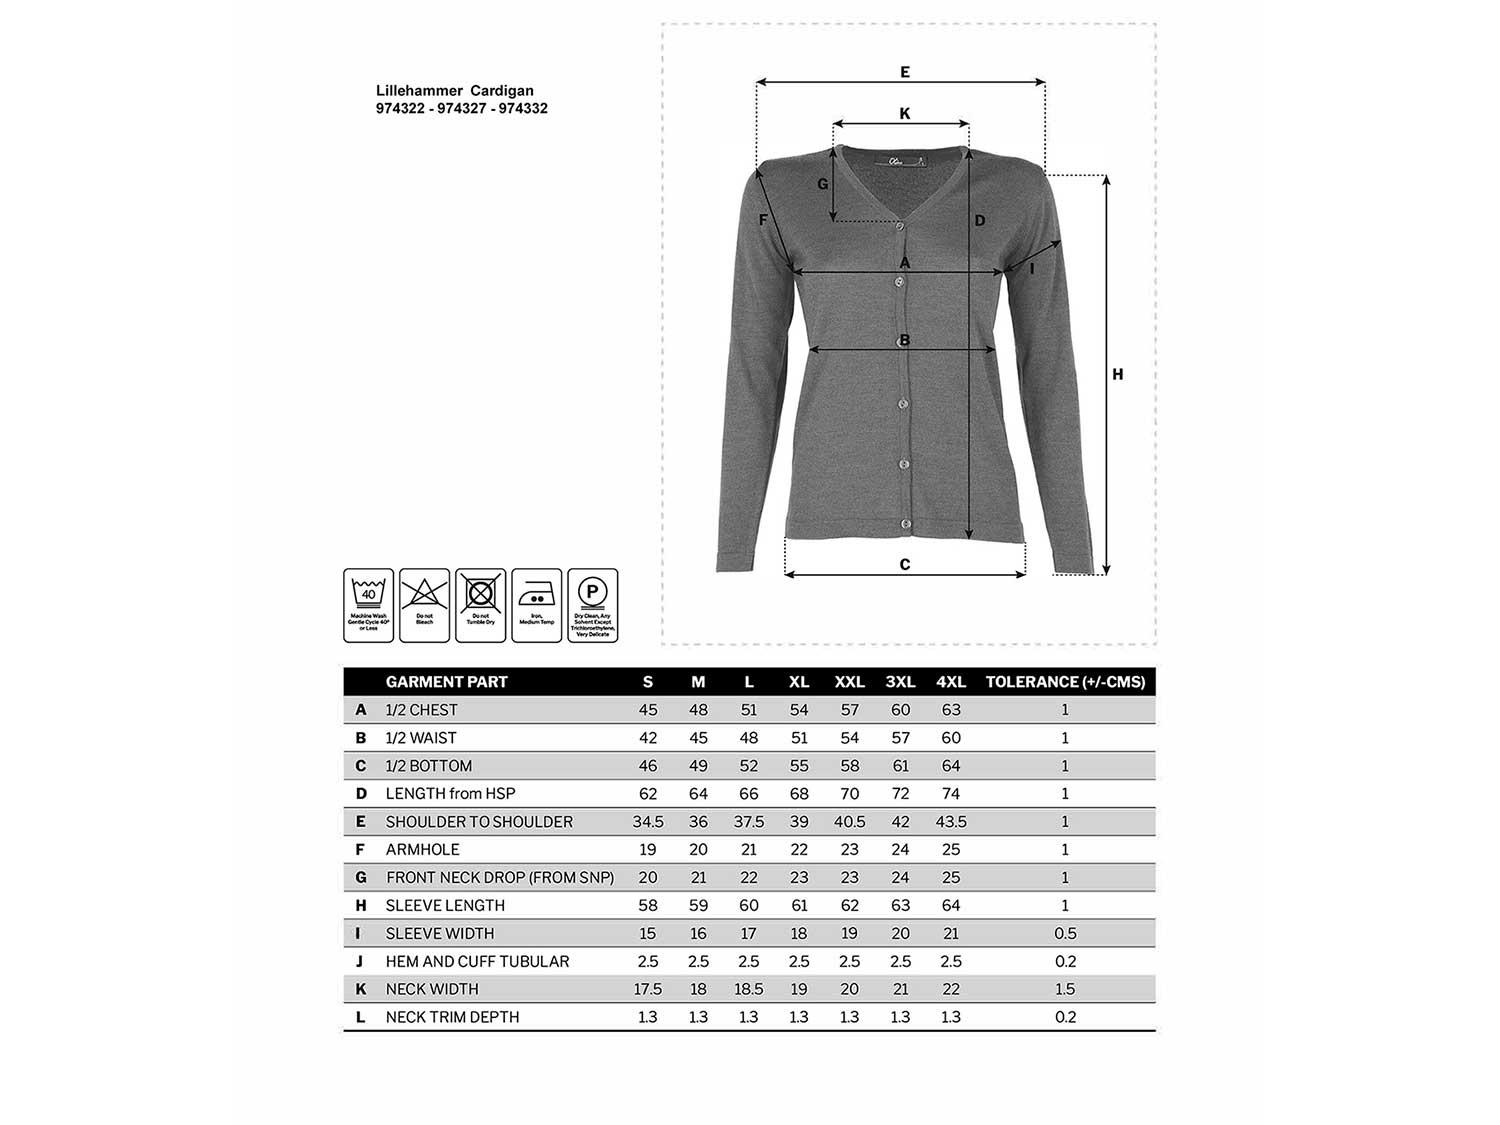 Size guide for uniform cardigan for women